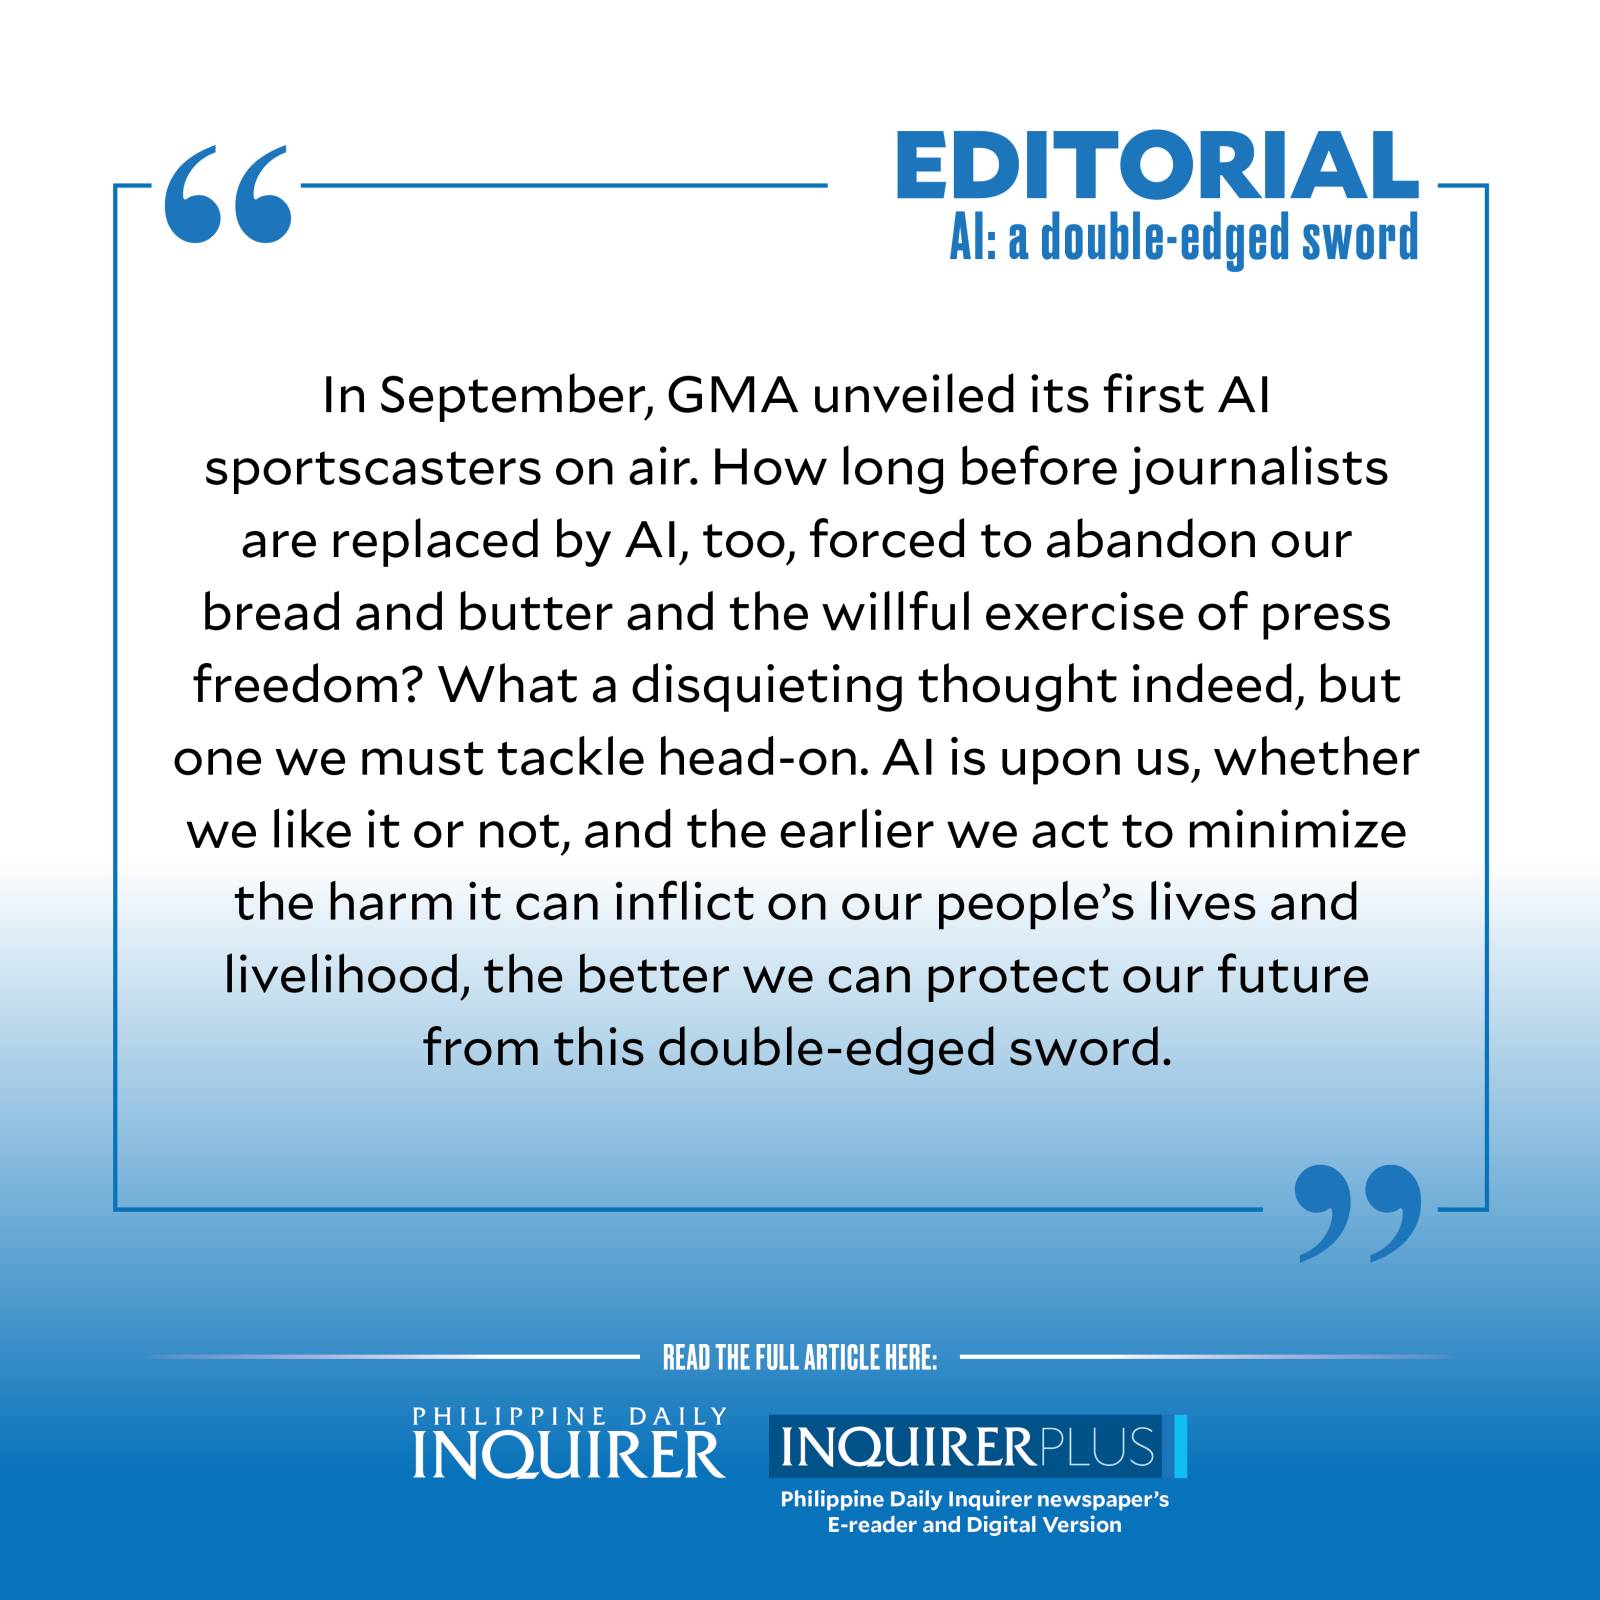 QUOTE CARD FOR EDITORIAL: AI a double-edged sword